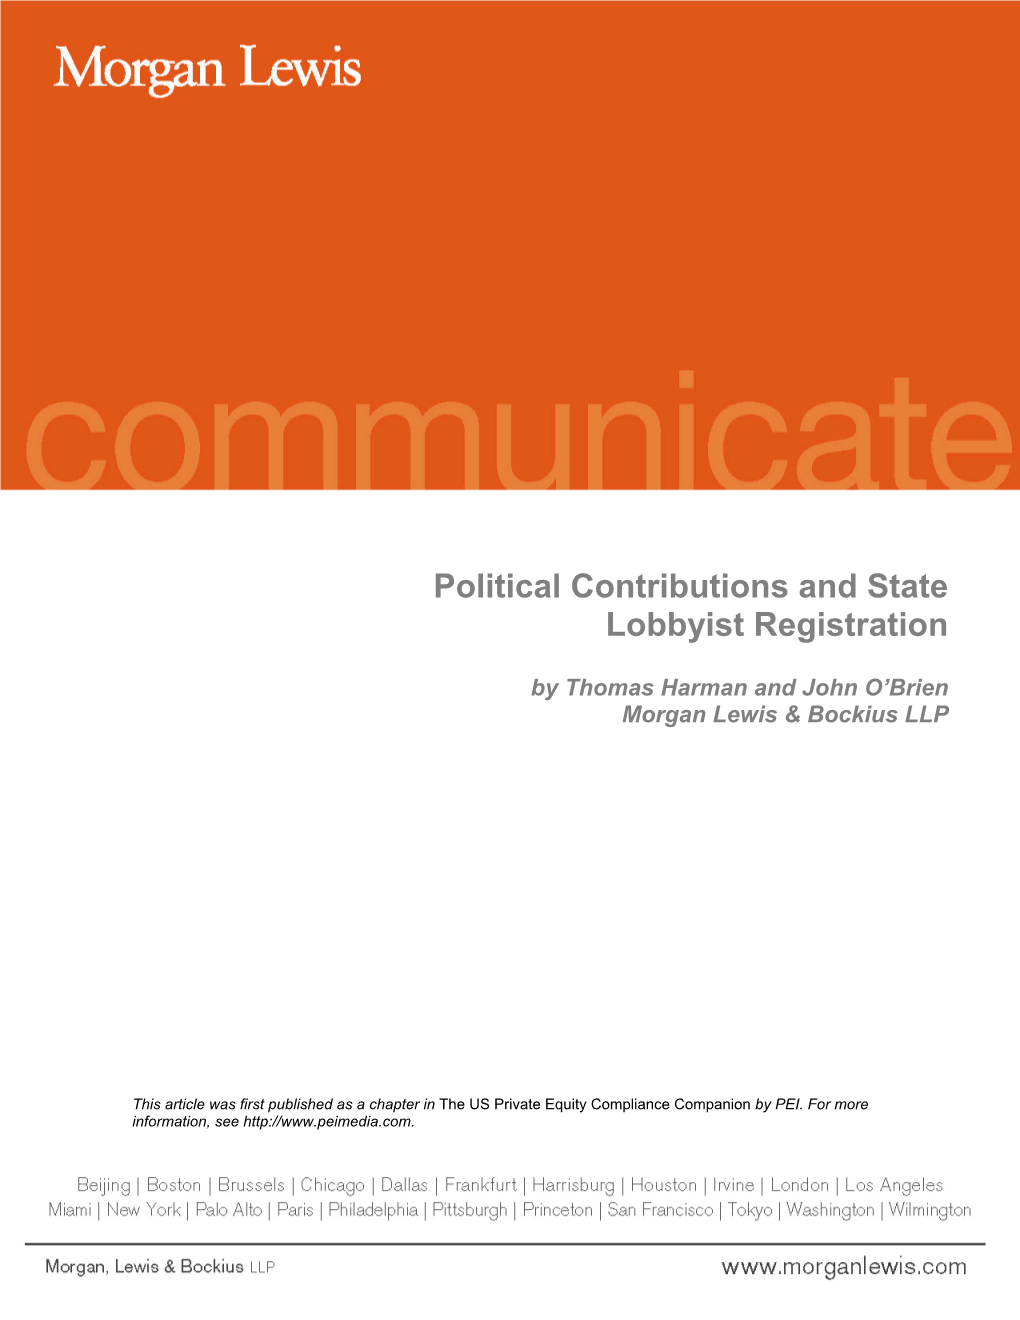 Political Contributions and State Lobbyist Registration